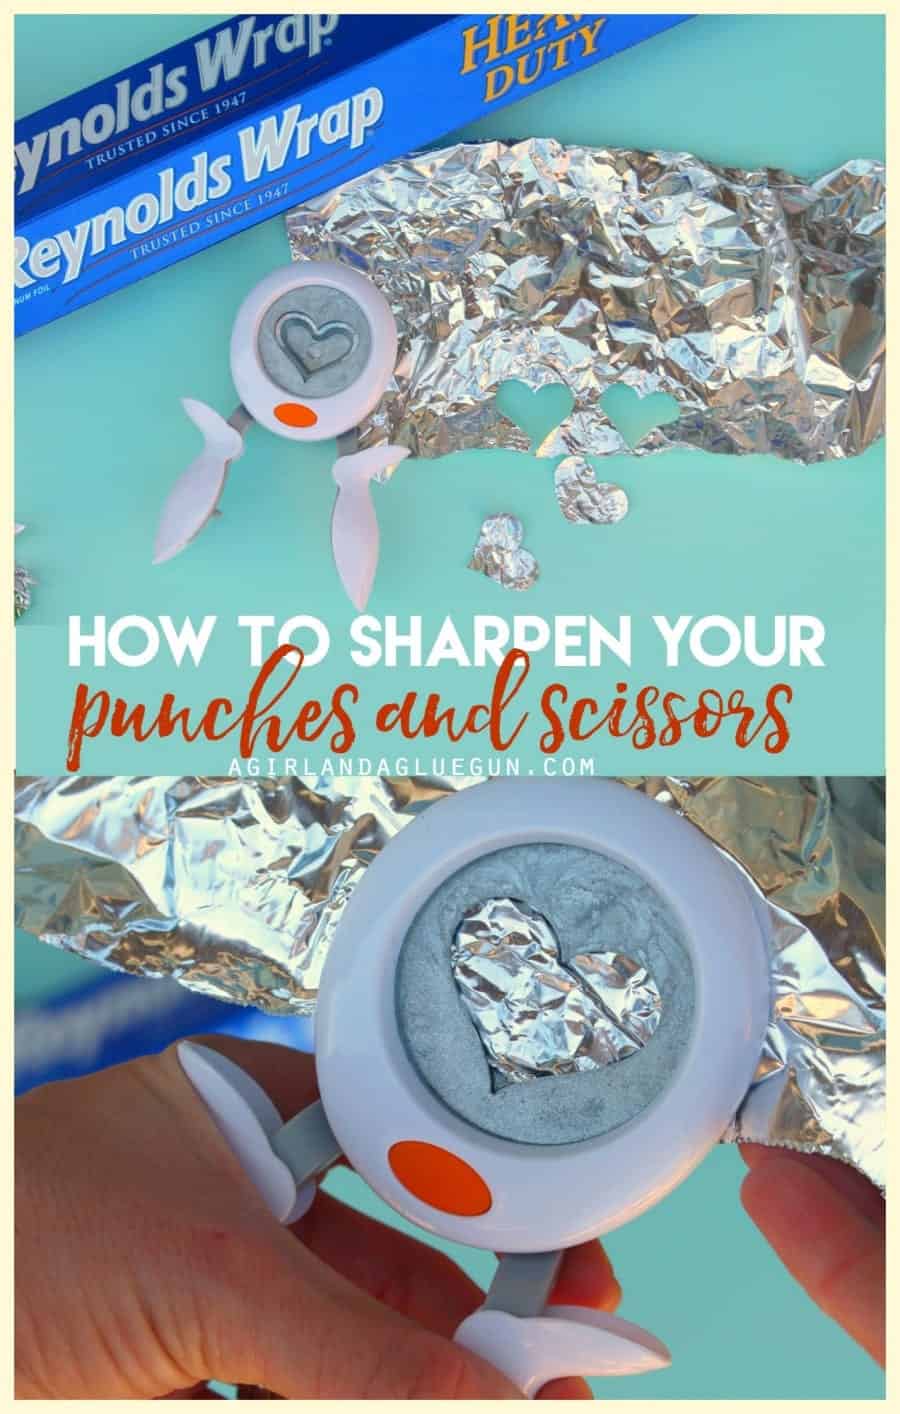 how to sharpen your paper punches and scissors